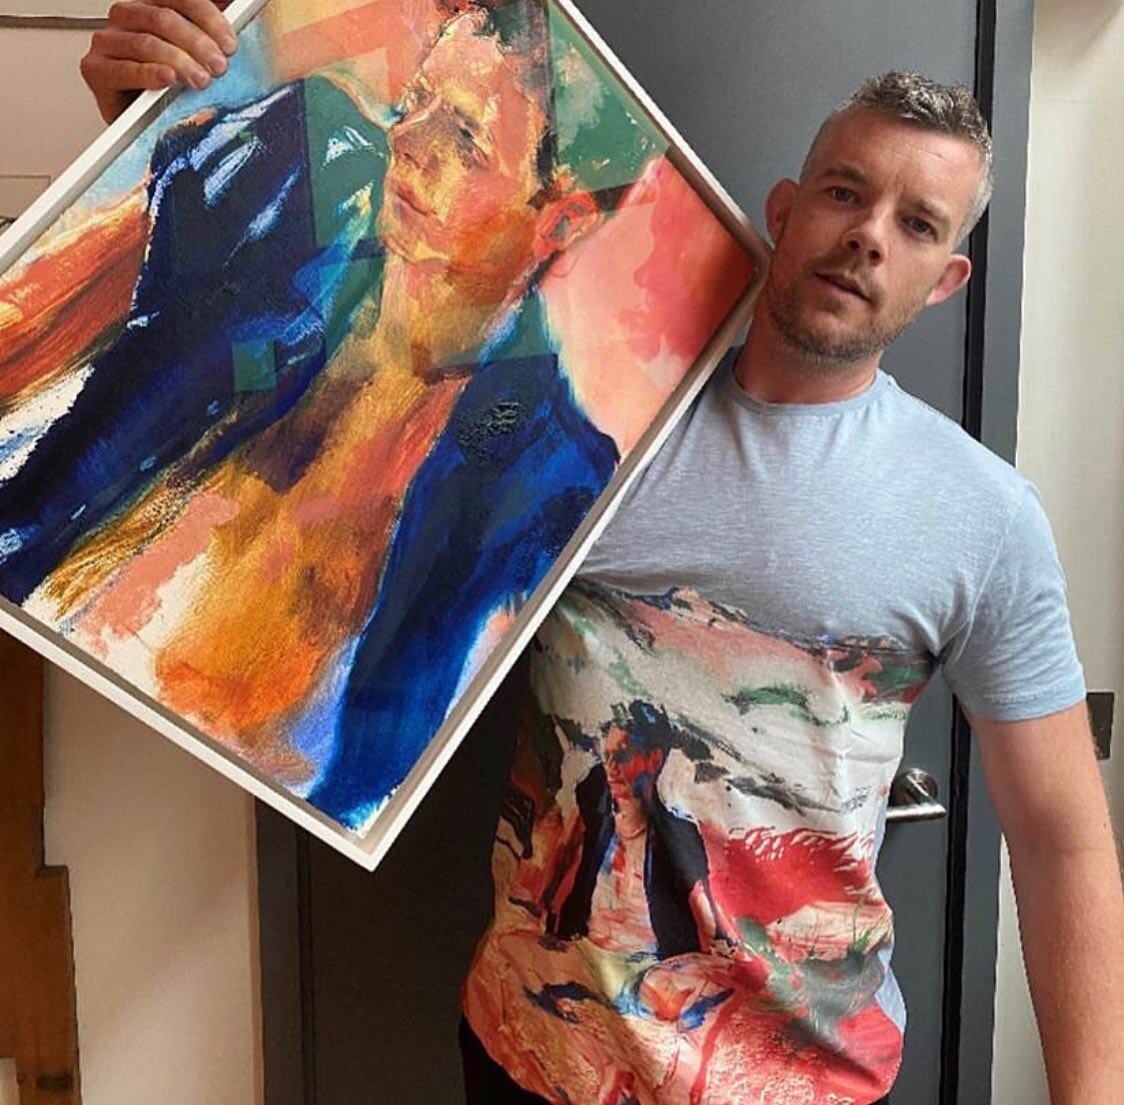 Master pieces 🖼 👕 @russelltovey wearing @doronlangberg &lsquo;s design from the @toddsnyder pride capsule collection - with donations to @visual_aids ❤️